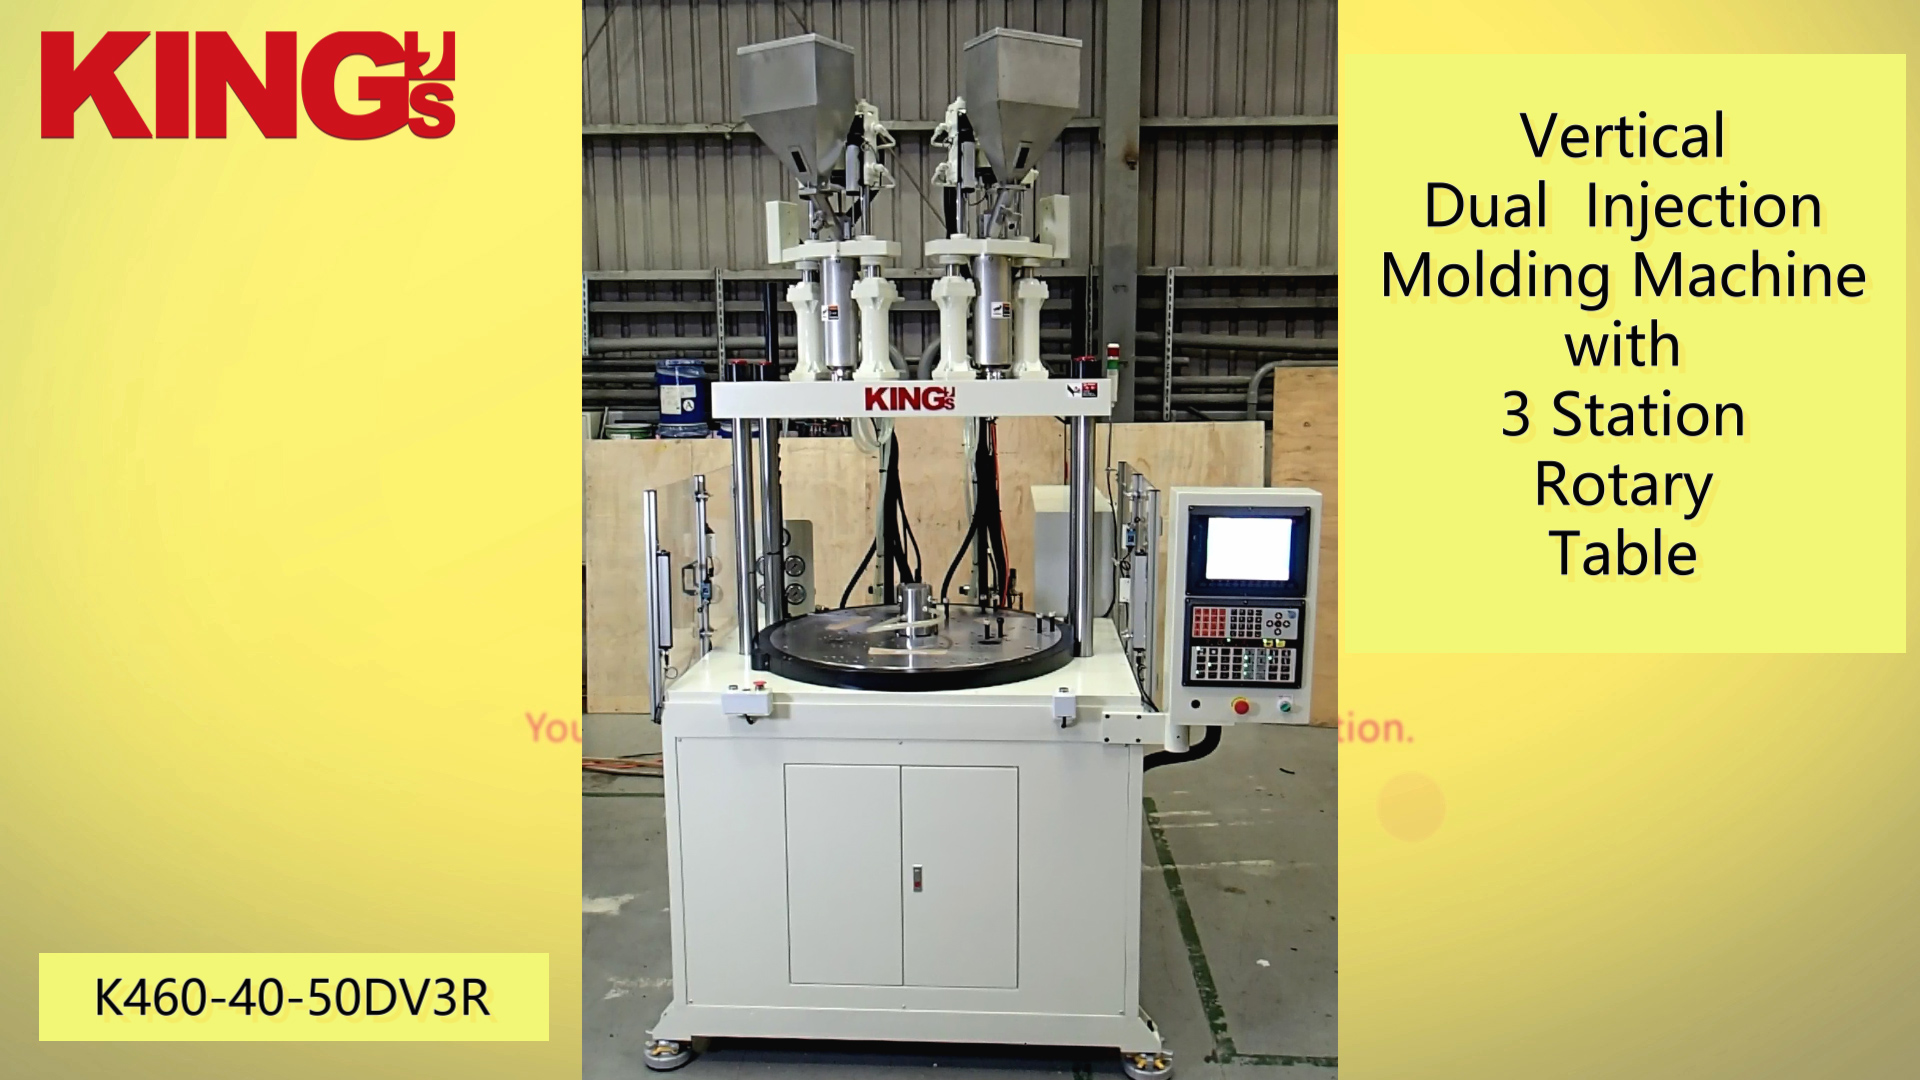 Vertical Dual Injection Molding Machine with 3 Station Rotary Table  K460-40-50DVR